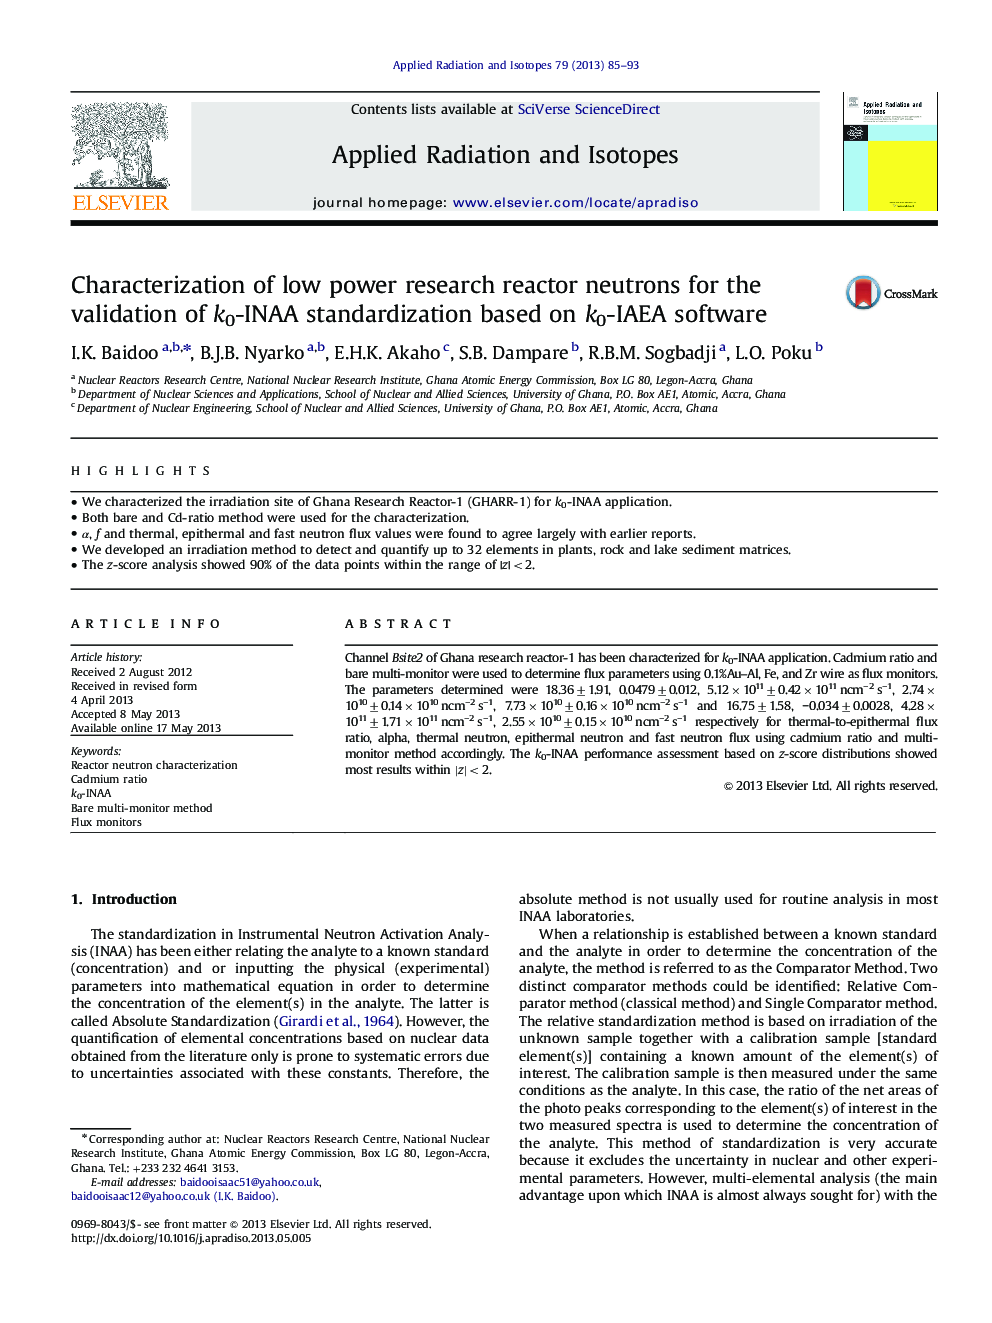 Characterization of low power research reactor neutrons for the validation of k0-INAA standardization based on k0-IAEA software